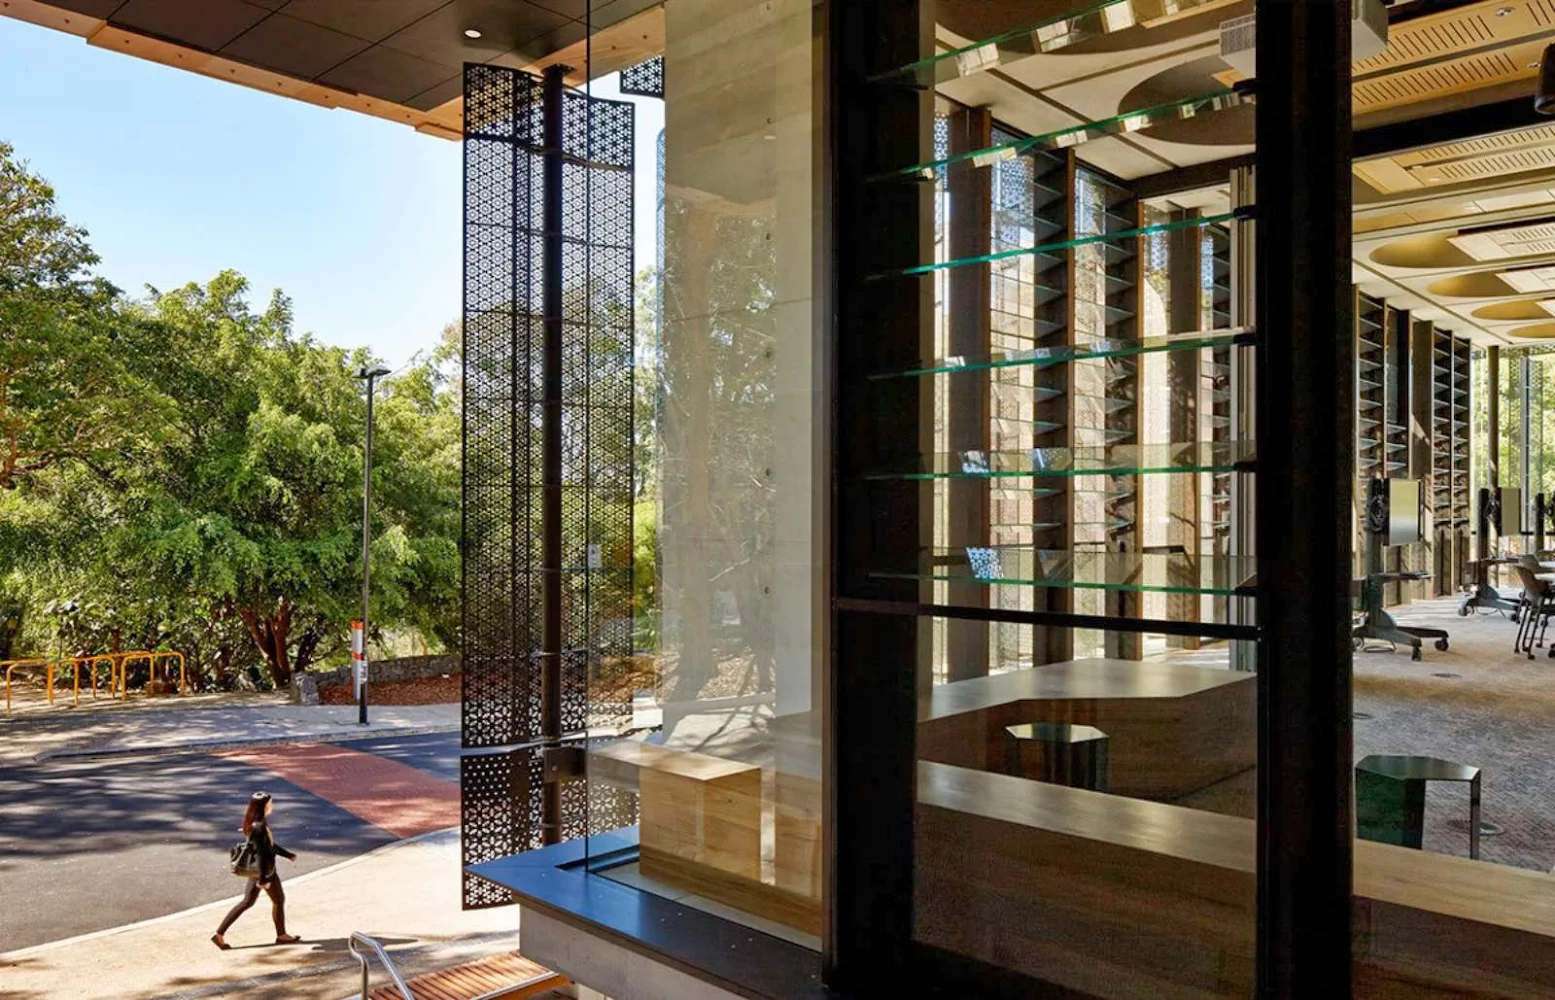 University of Queensland Global Change Institute by HASSELL